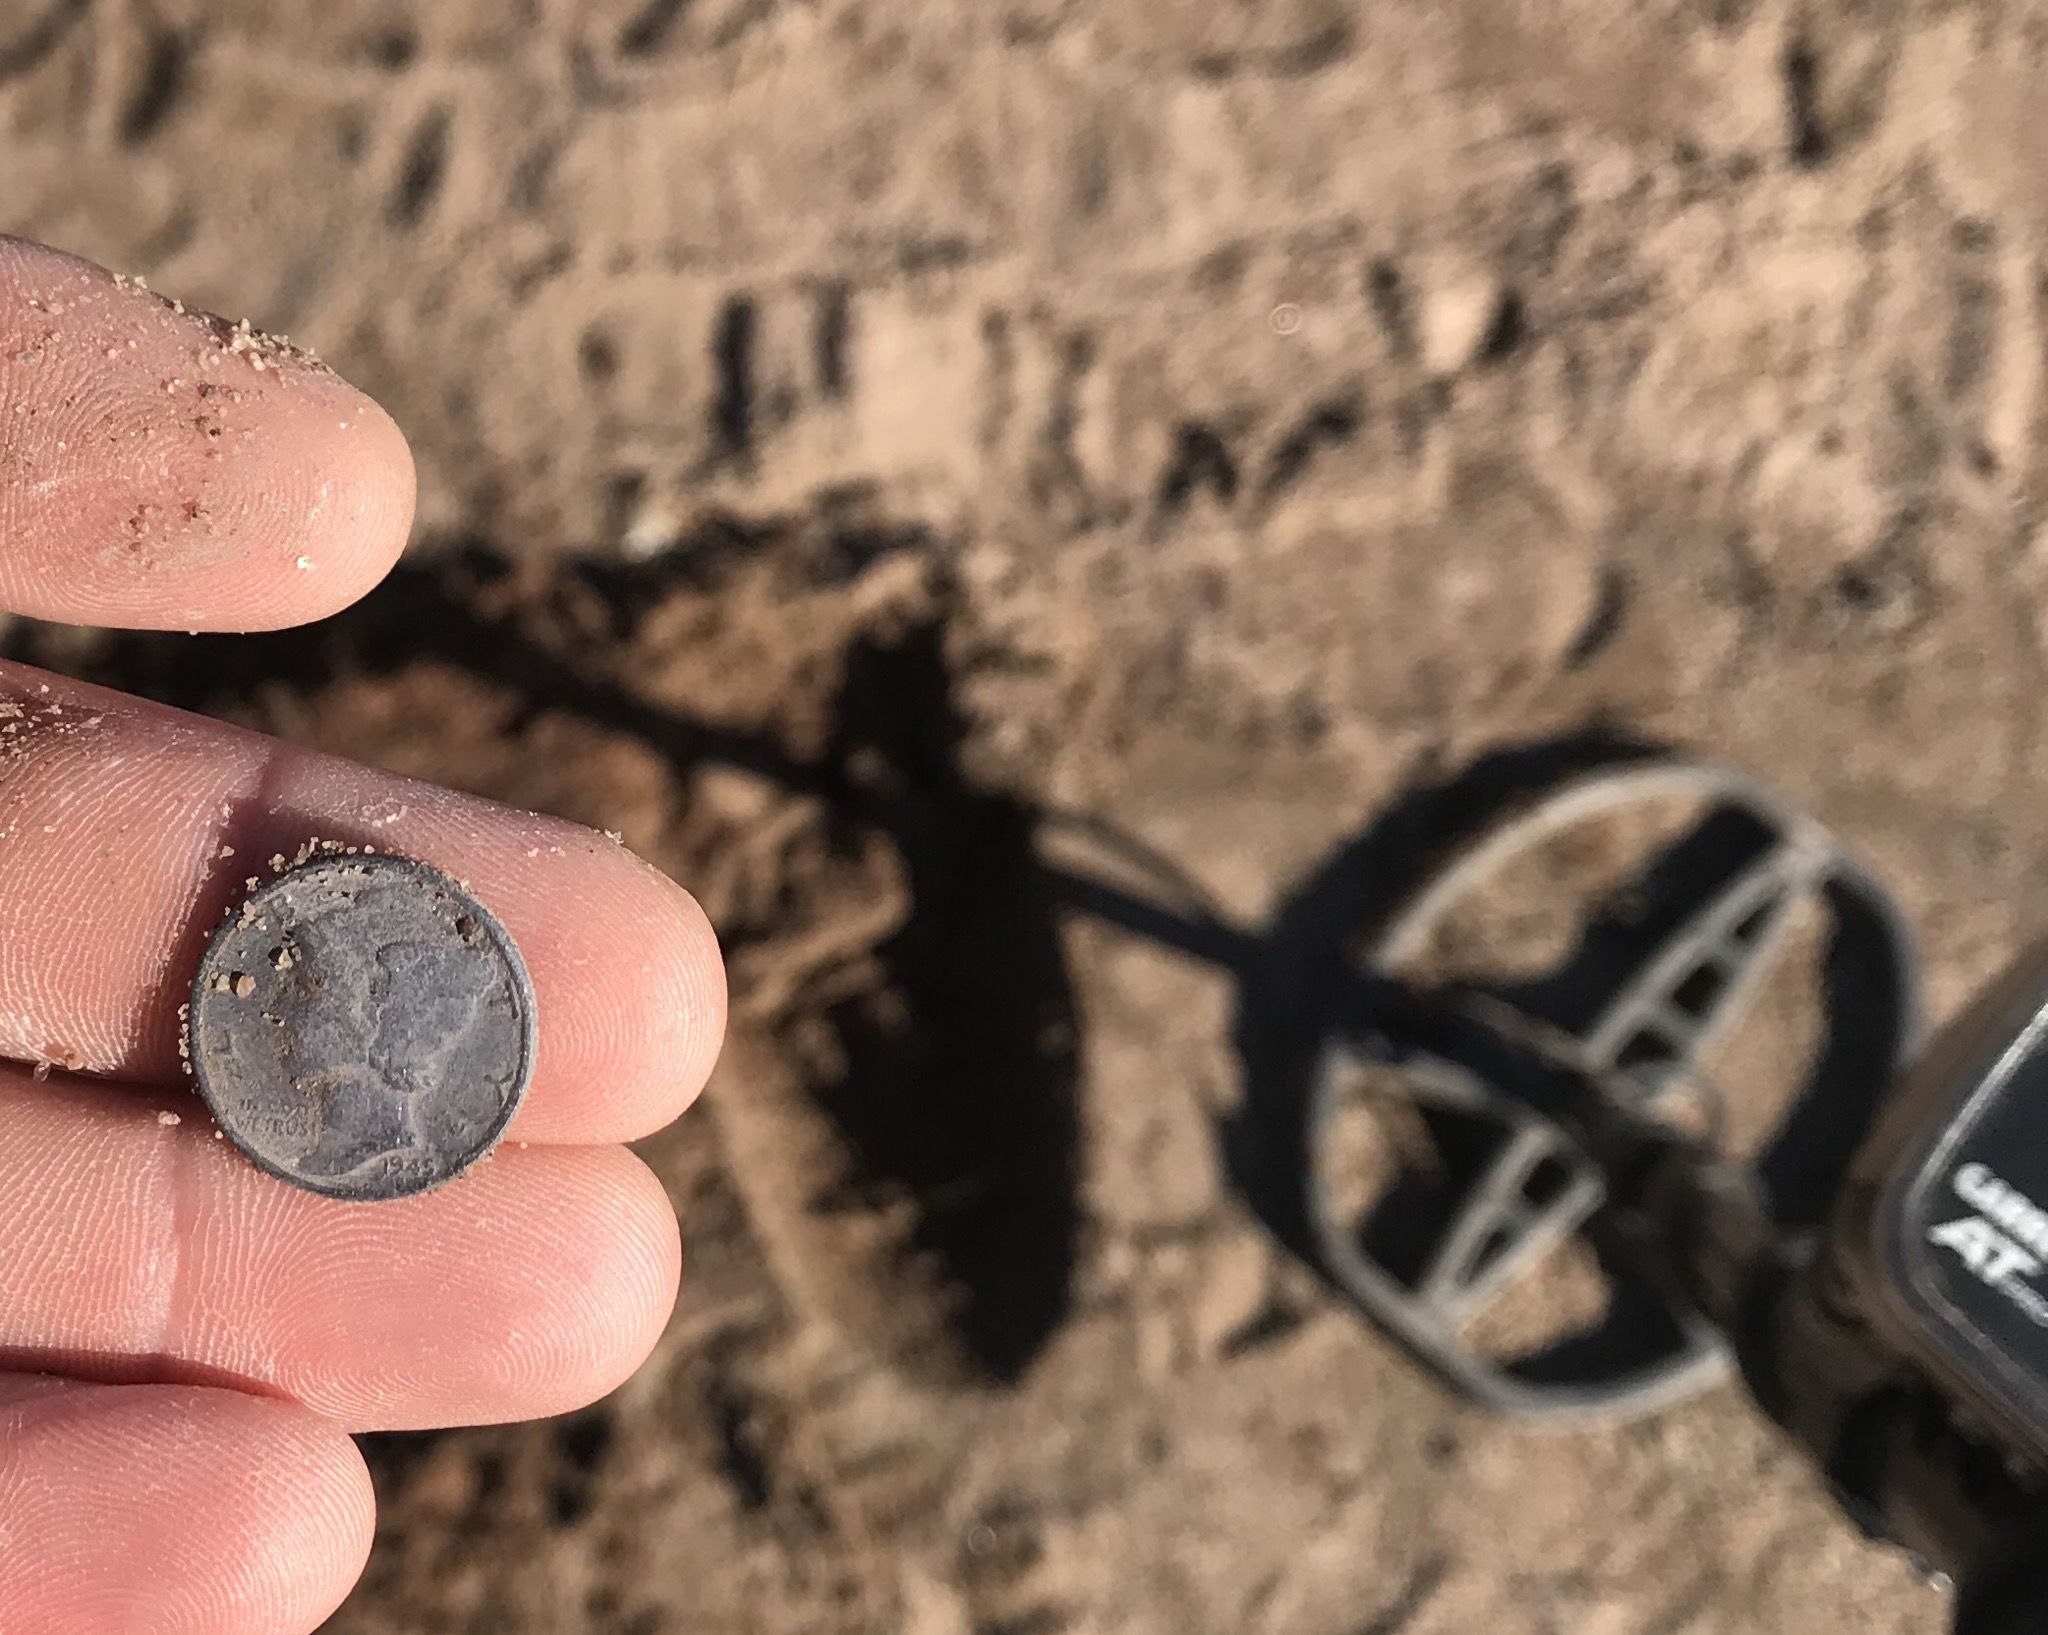 love finding silver, but the moist salt sand environment does its damage. Still an exciting find